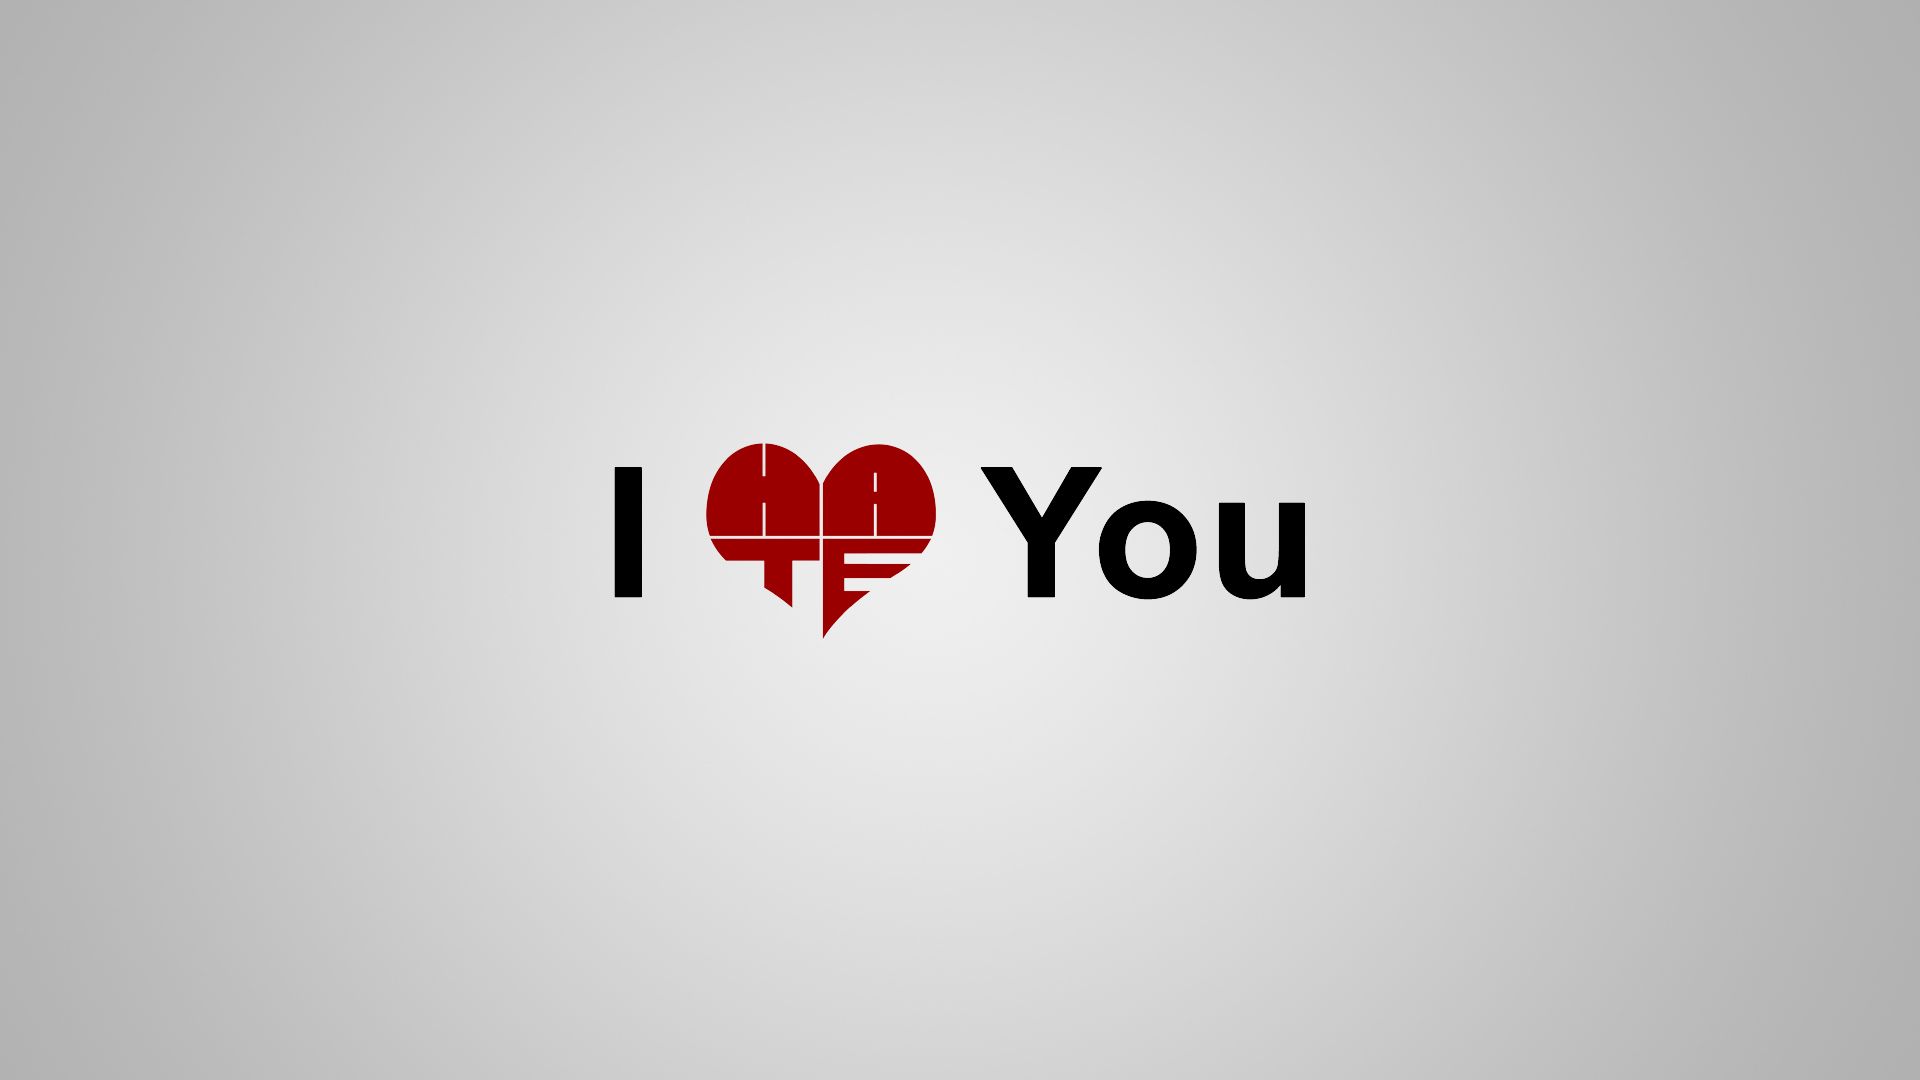 Best 59+ I Hate You Wallpapers on HipWallpapers.